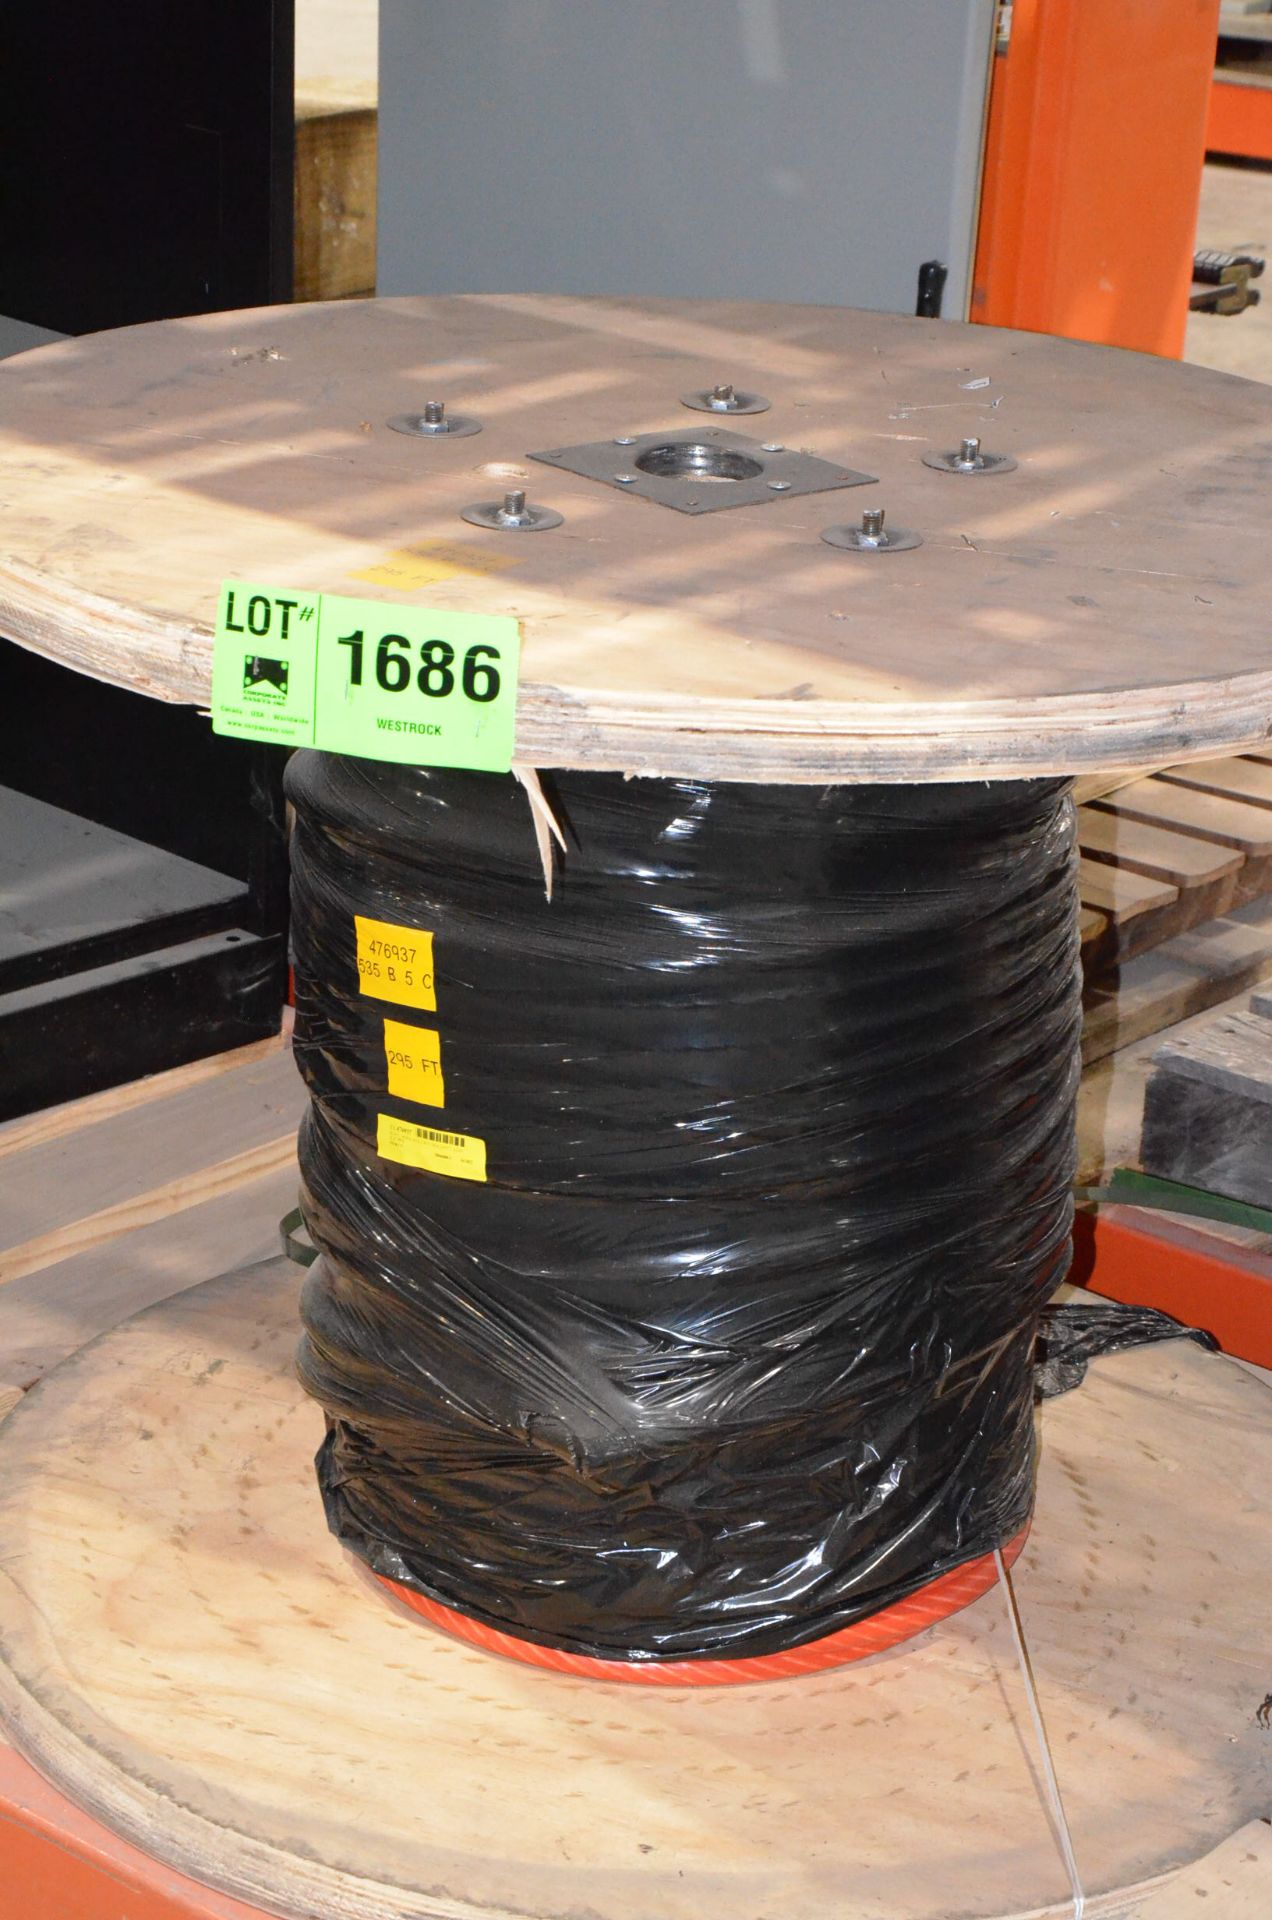 LOT/ 7/8" 6X25 PFV WIRE ROPE